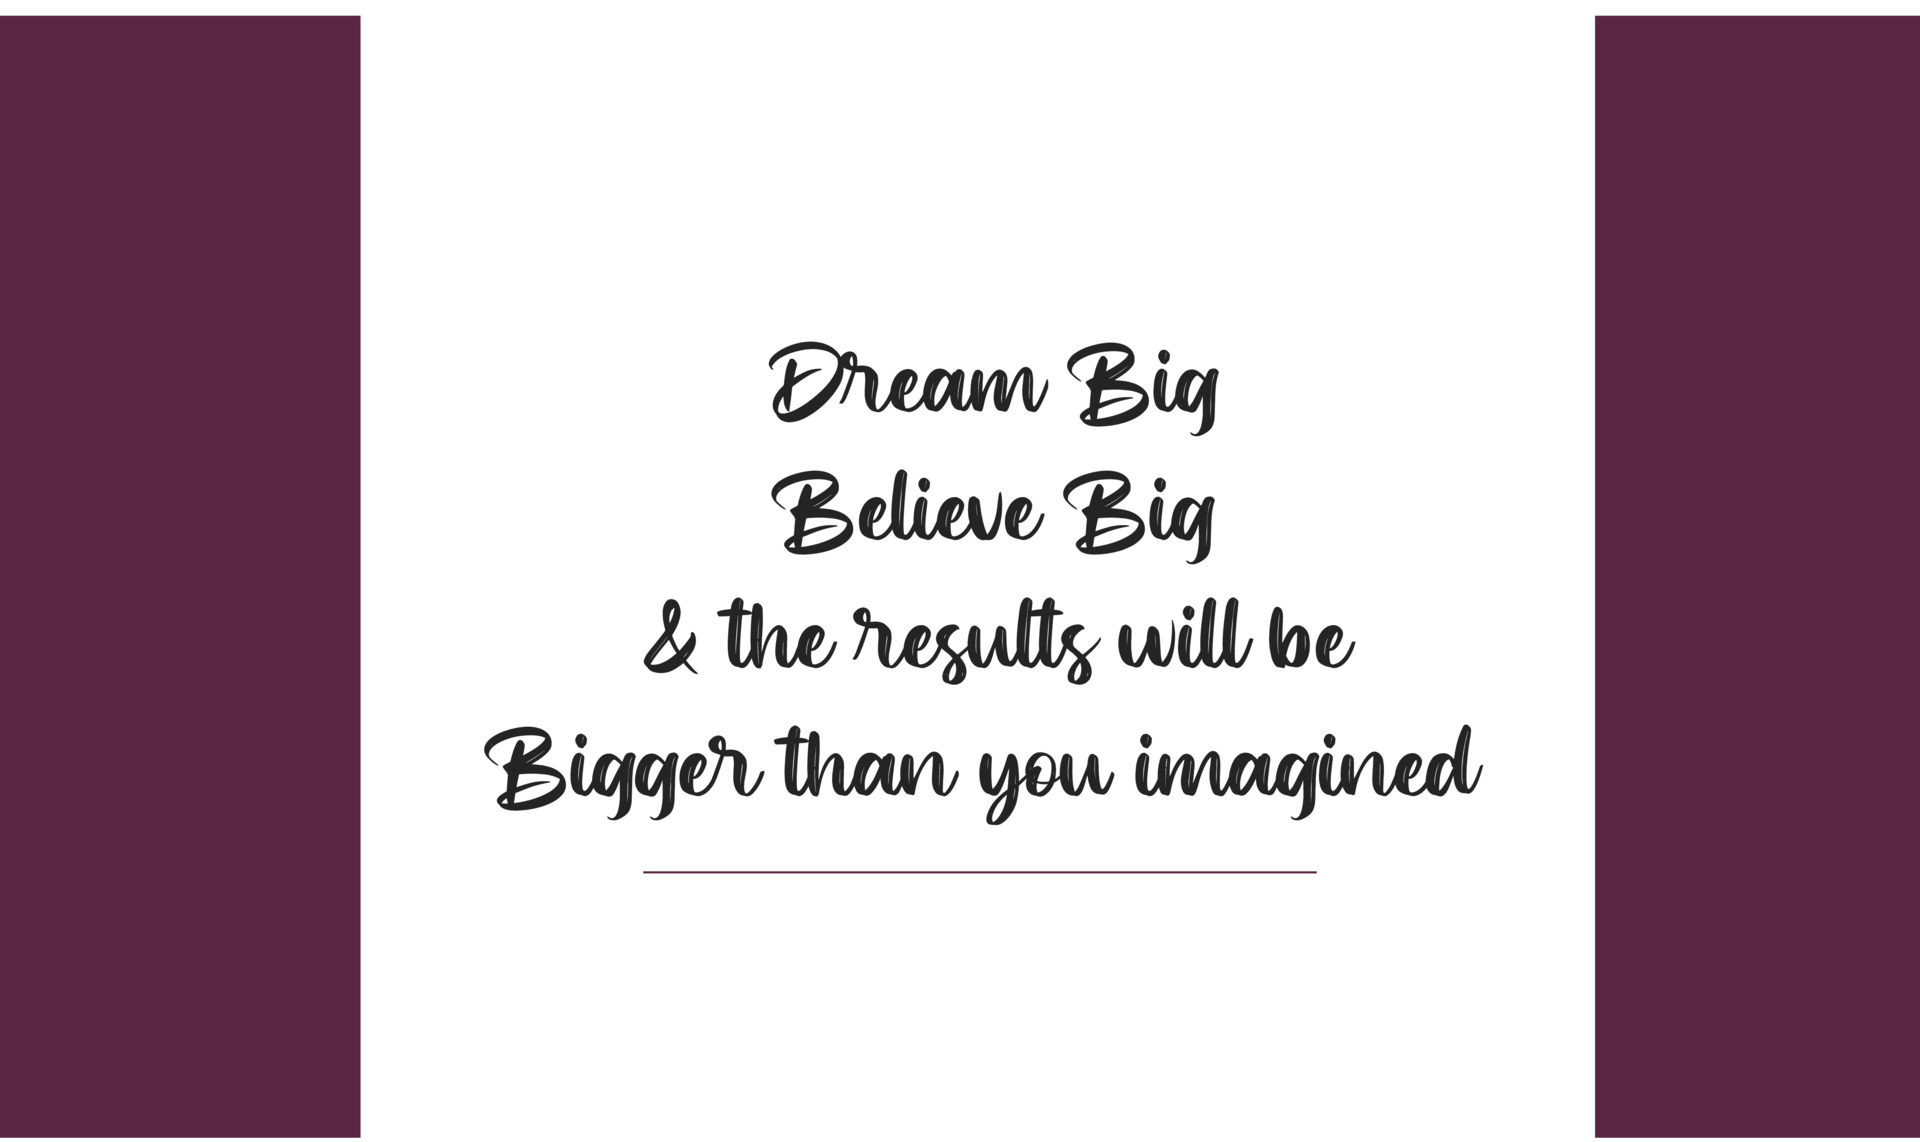 Dream big, believe big and the results will be bigger than you imagined.  Motivational and inspirational quotes in wine color background for  interiors, shirts, posters, gifts, or other printing gifts. 6196392 Vector